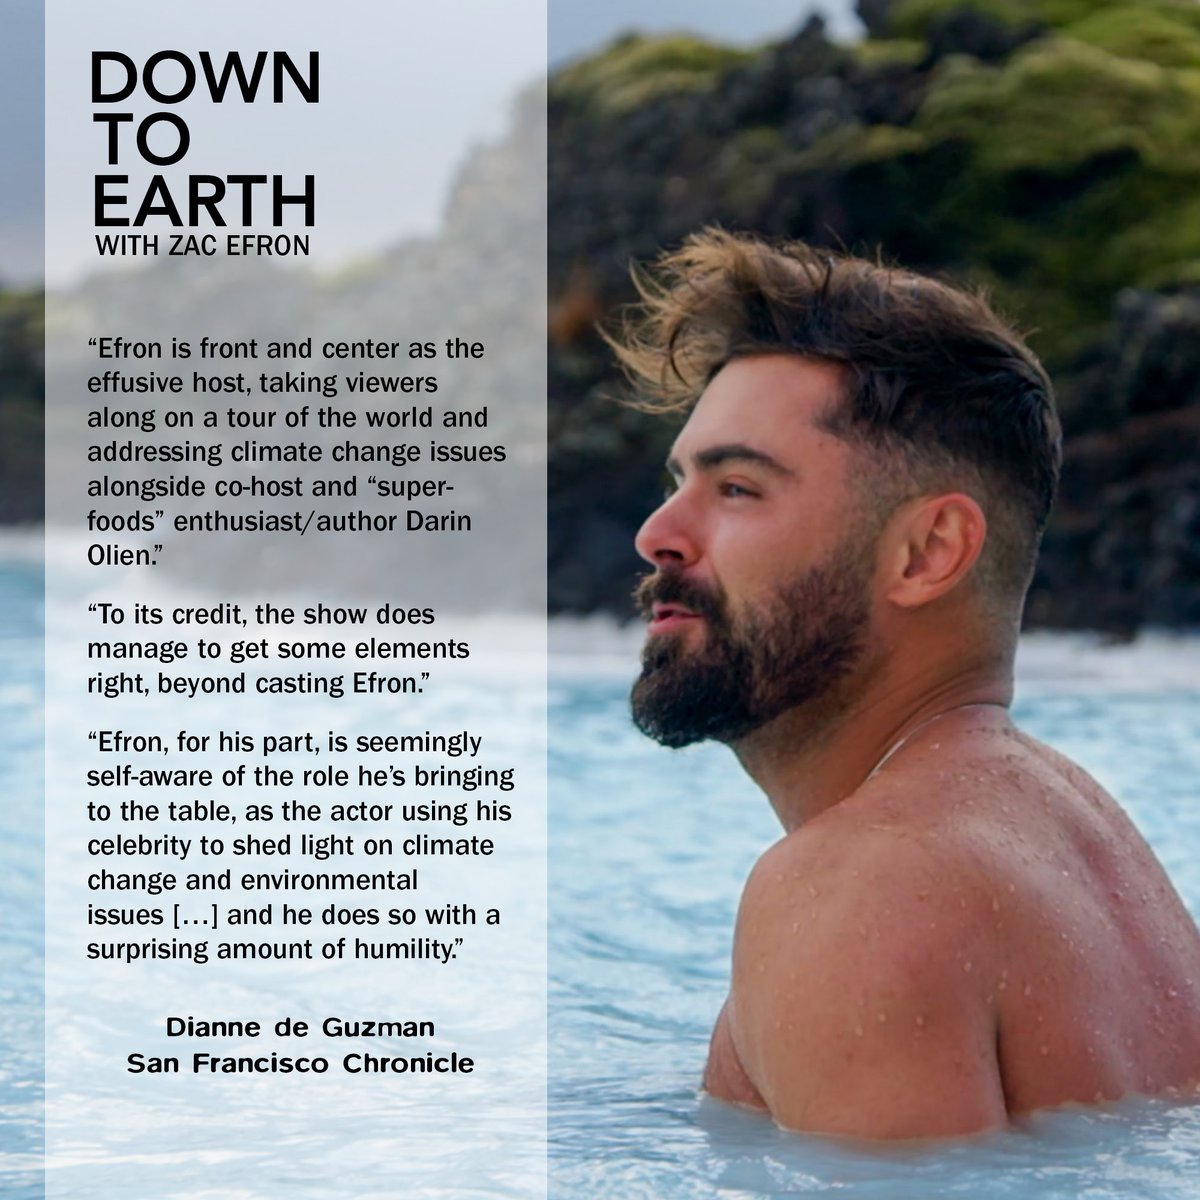 “Efron, for his part, is seemingly self-aware of the role he’s bringing to the table, as the actor using his celebrity to shed light on climate change and environmental issues […] and he does so with a surprising amount of humility.”

#DownToEarthWithZacEfron #DTE #ZacEfron